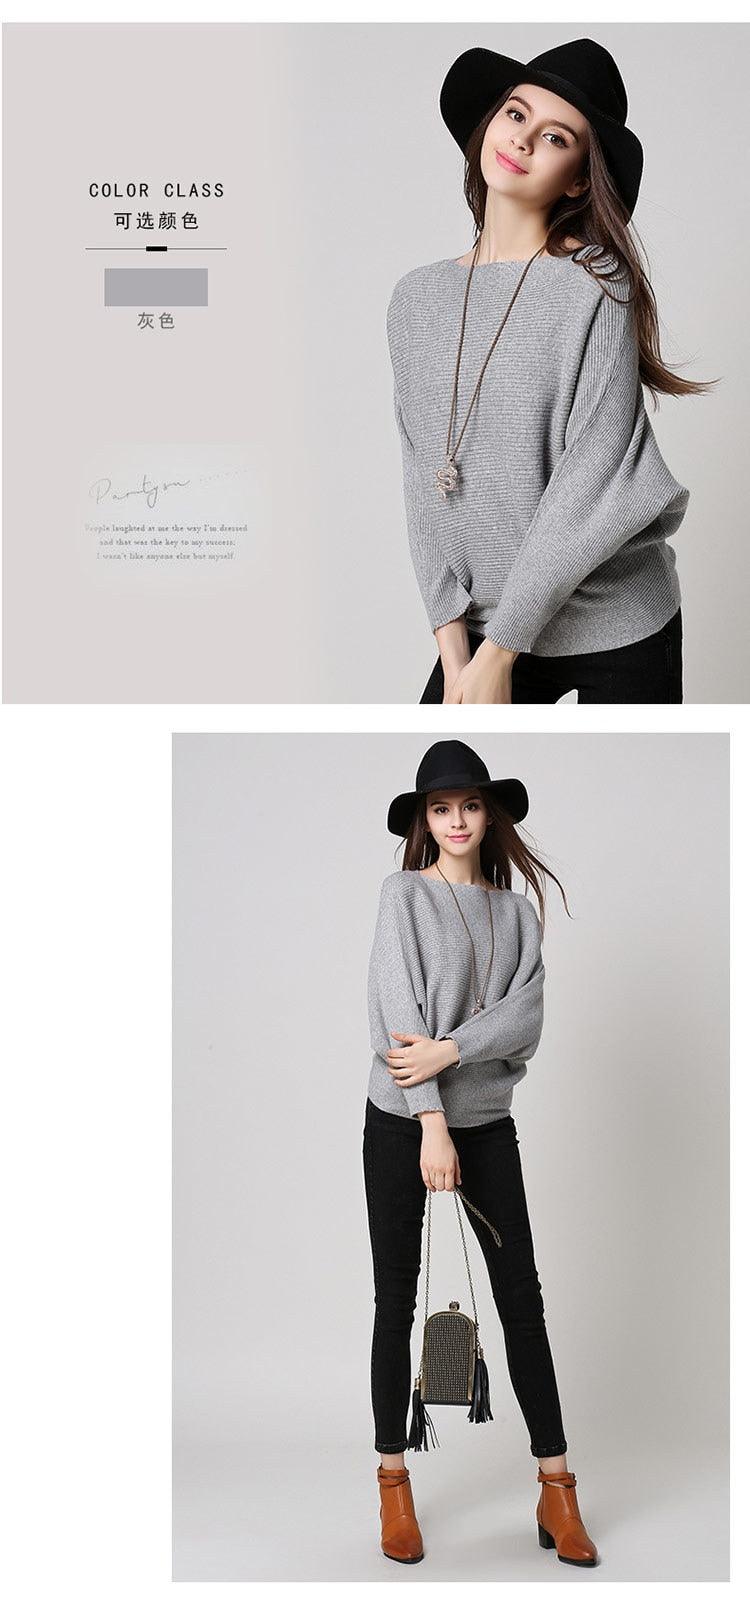 Boat Neck Batwing Sleeve Tapered Waist Knit Top - L & M Kee, LLC